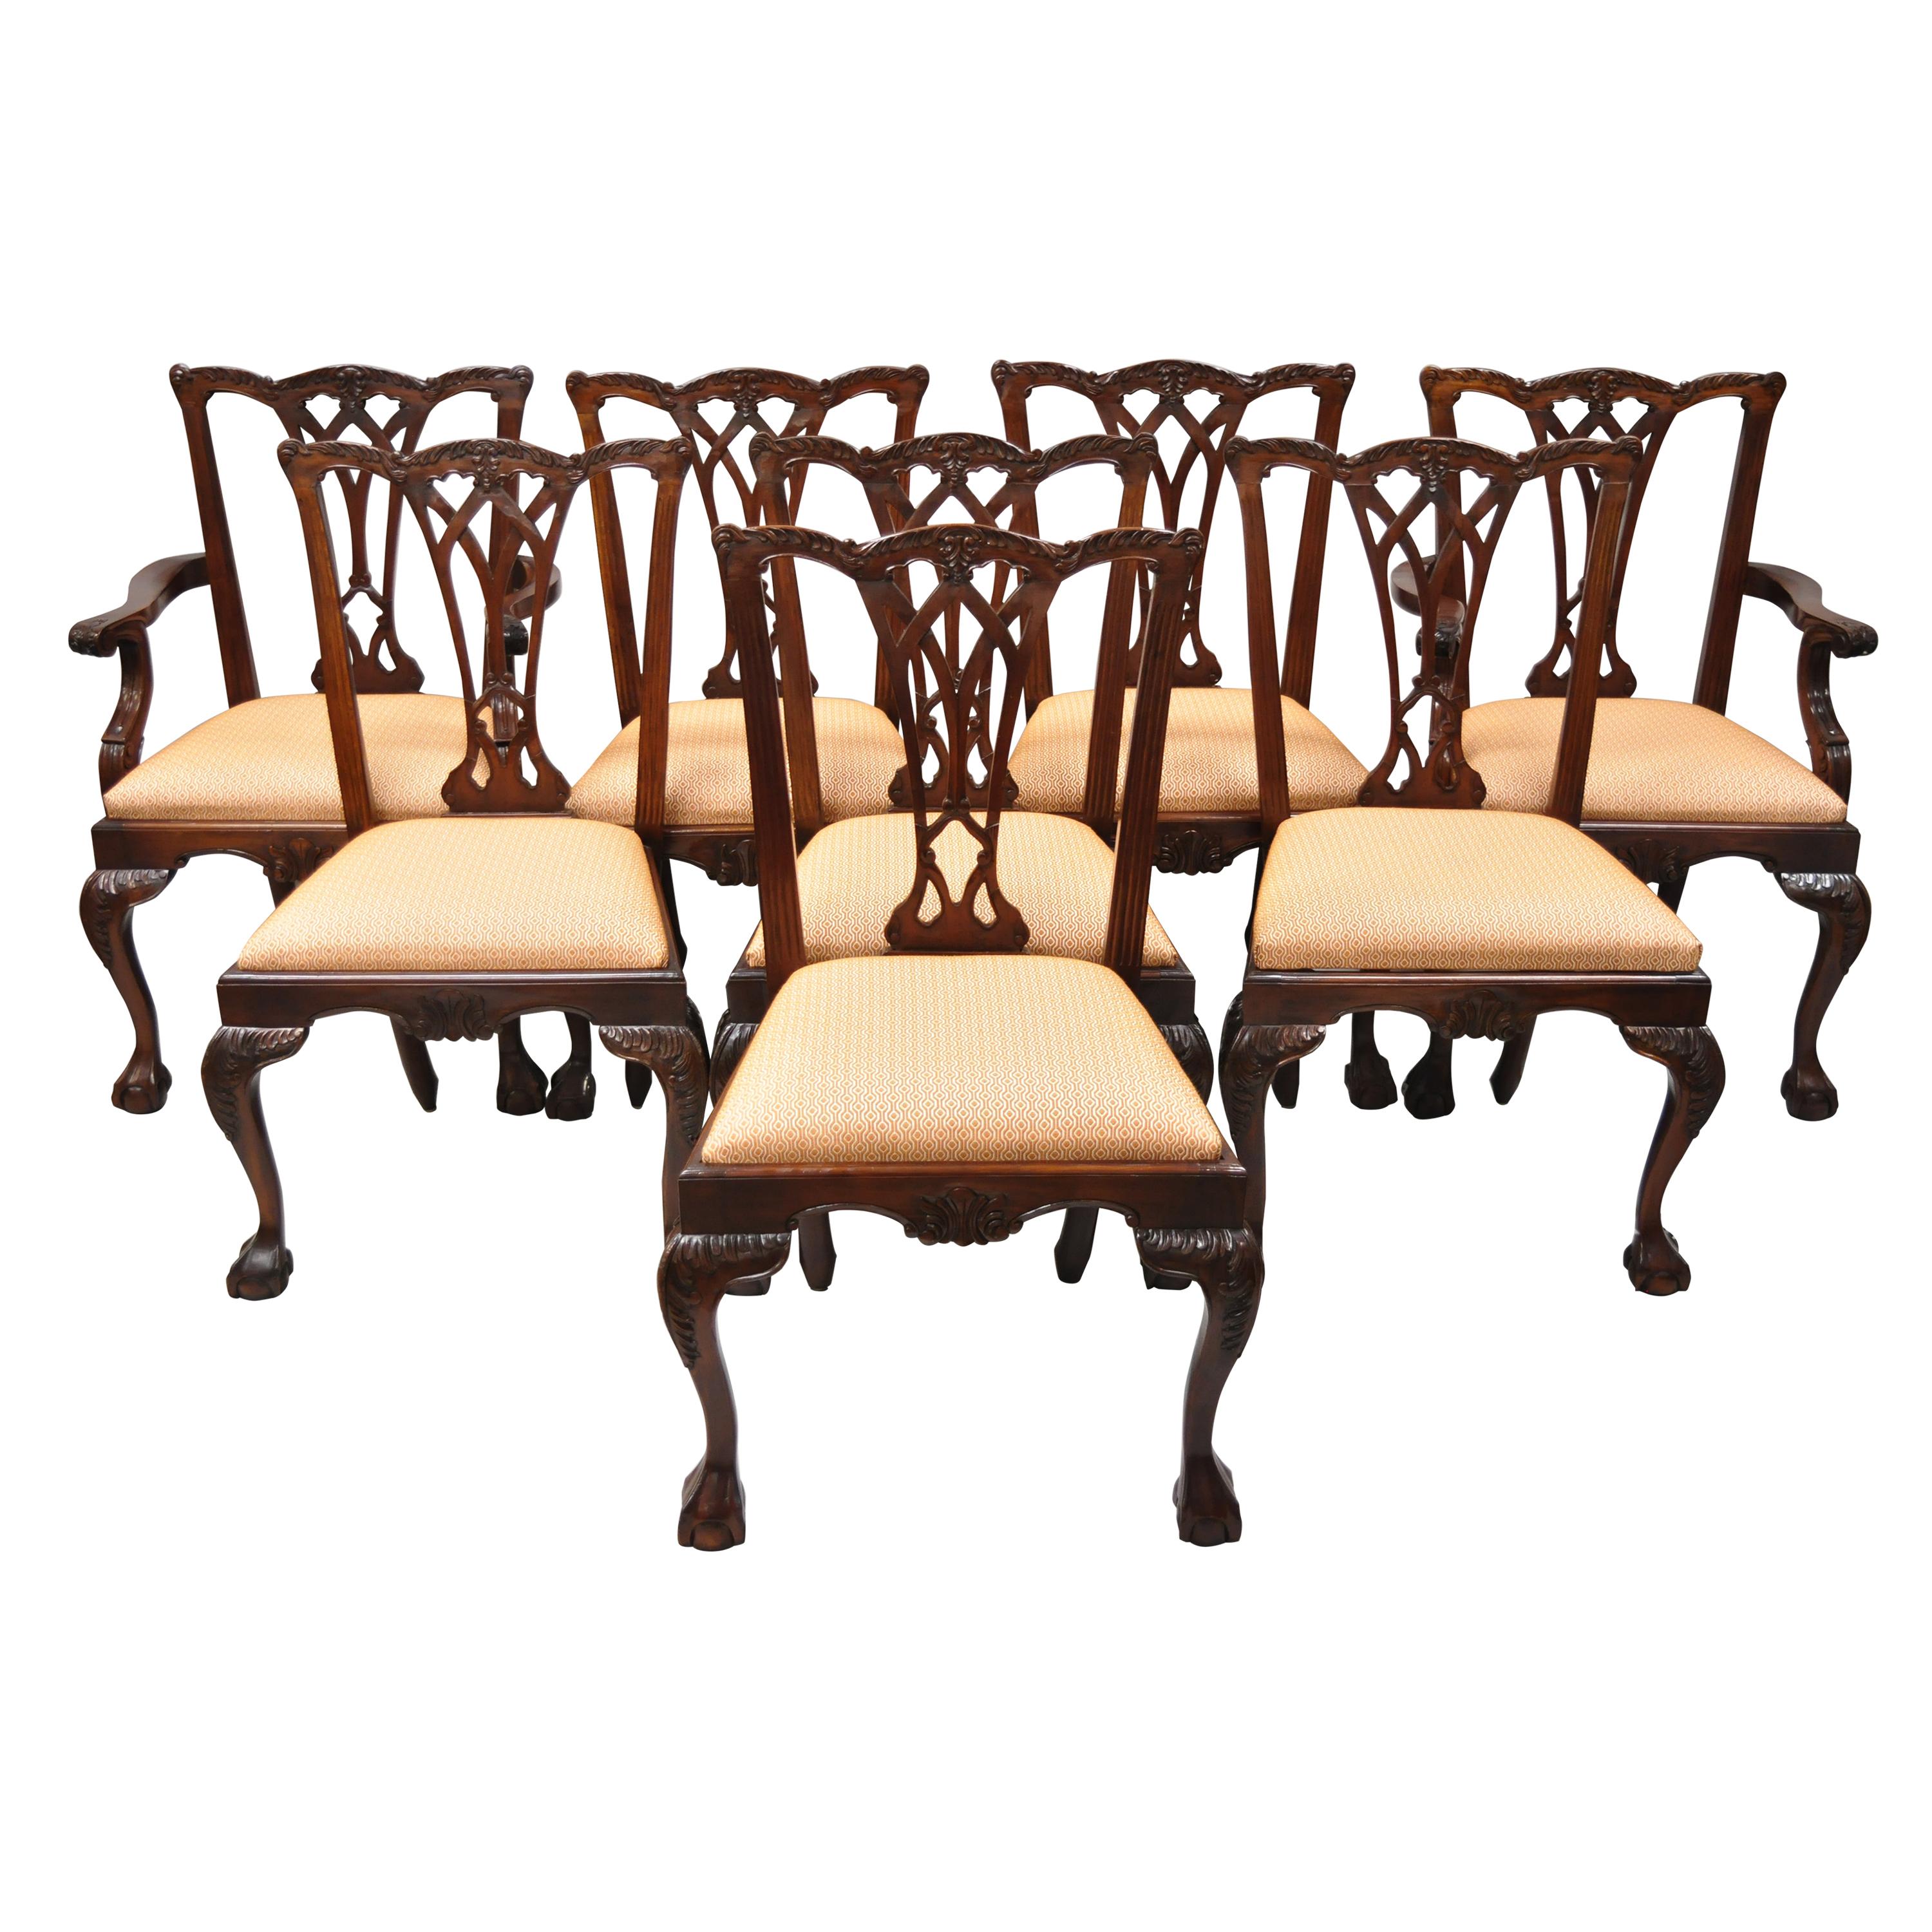 Chippendale Style Carved Ball and Claw Mahogany Dining Chairs, Set of 8